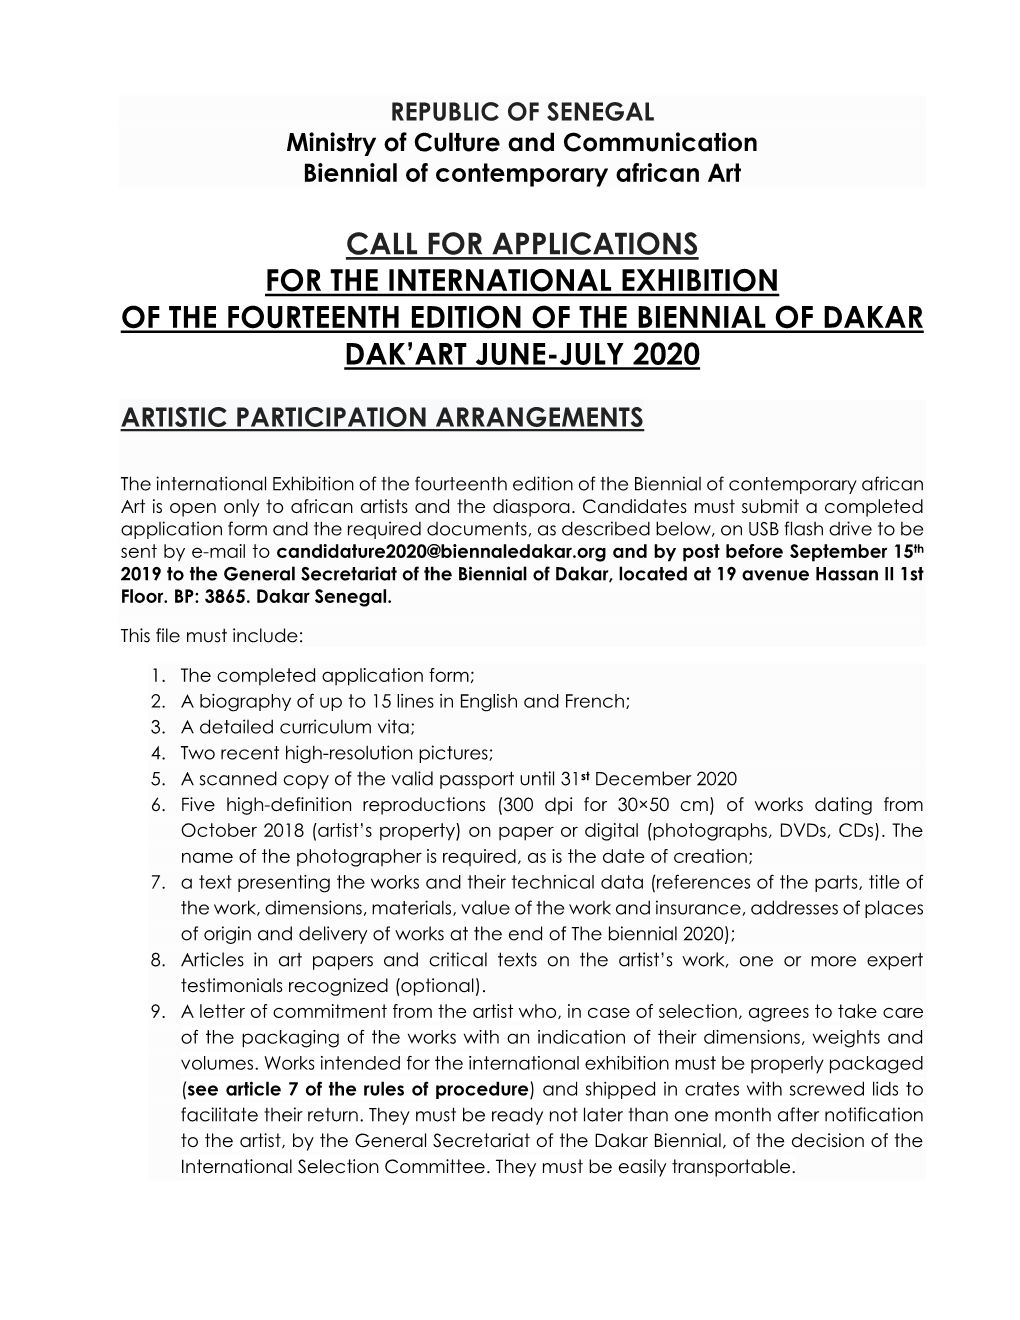 Call for Applications for the International Exhibition of the Fourteenth Edition of the Biennial of Dakar Dak’Art June-July 2020